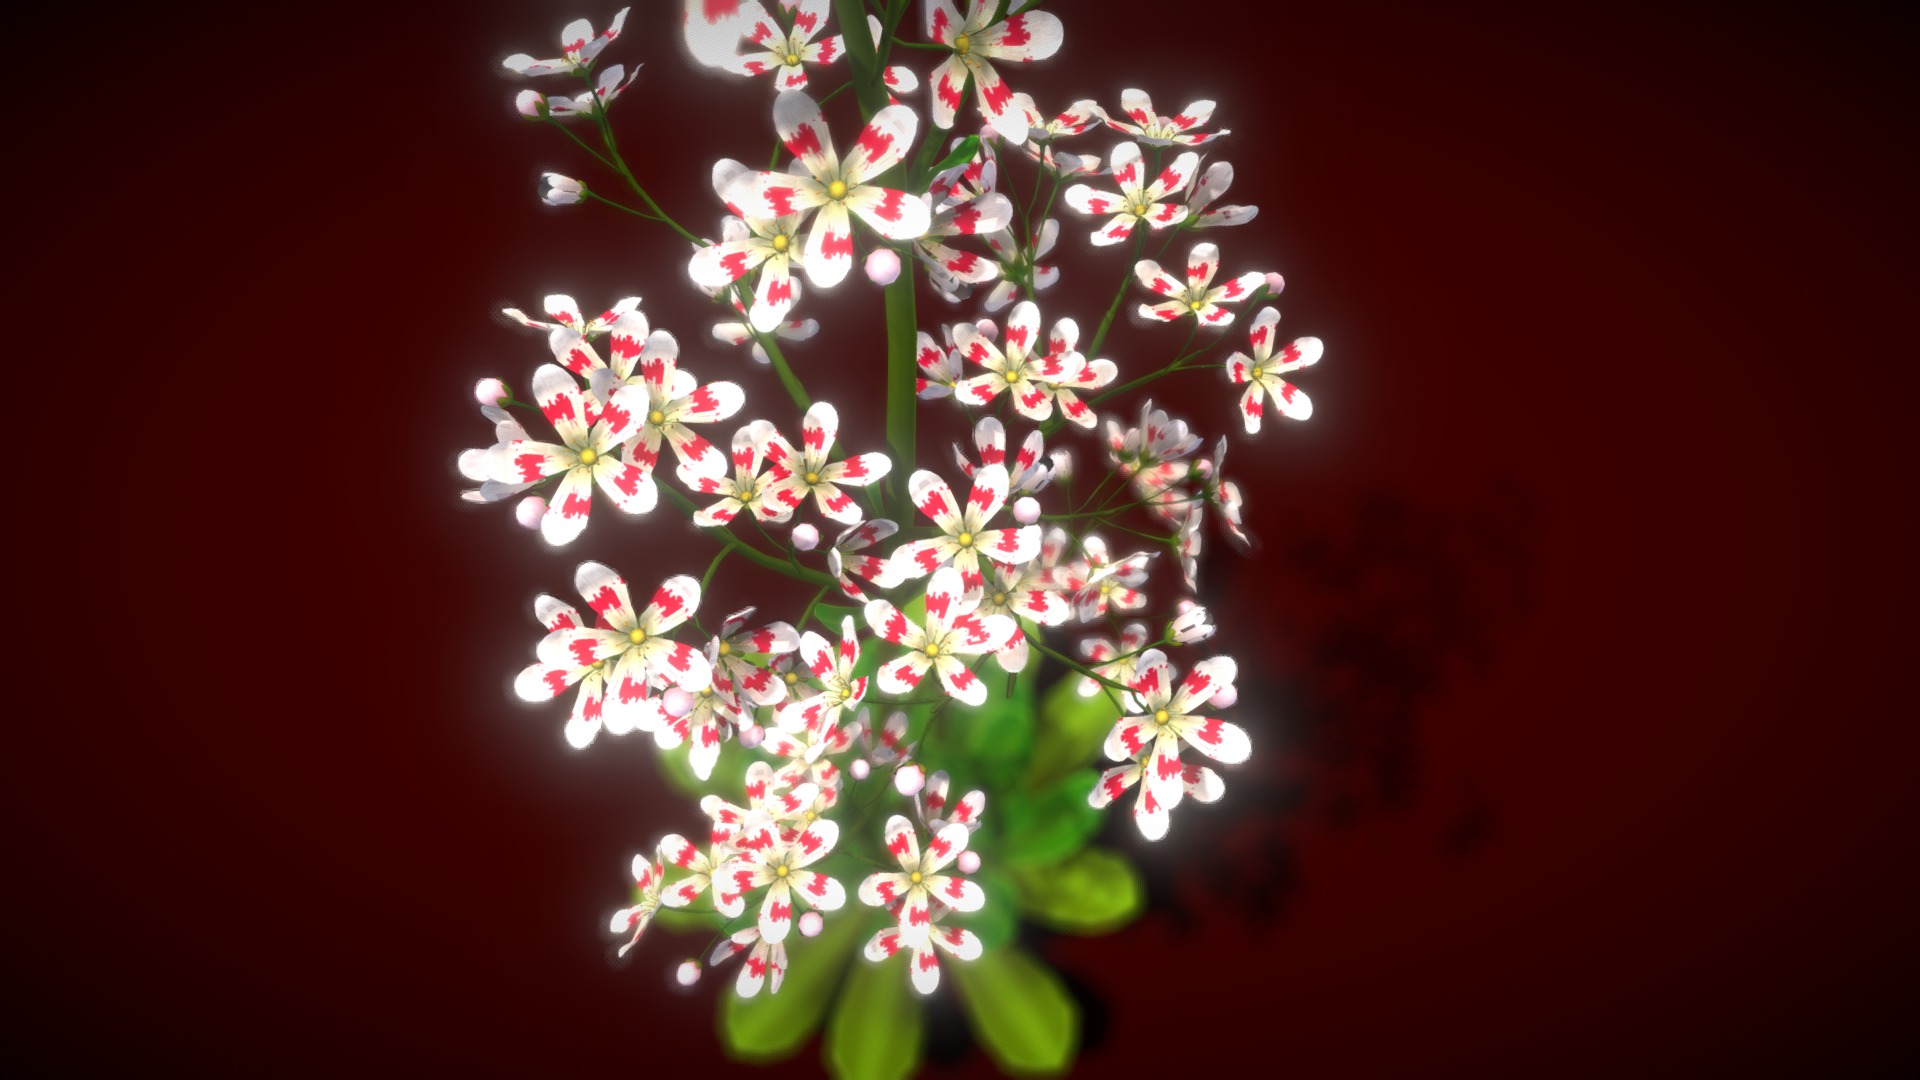 3D model F Lower Saxifraga Stolonifera - This is a 3D model of the F Lower Saxifraga Stolonifera. The 3D model is about a plant with flowers.